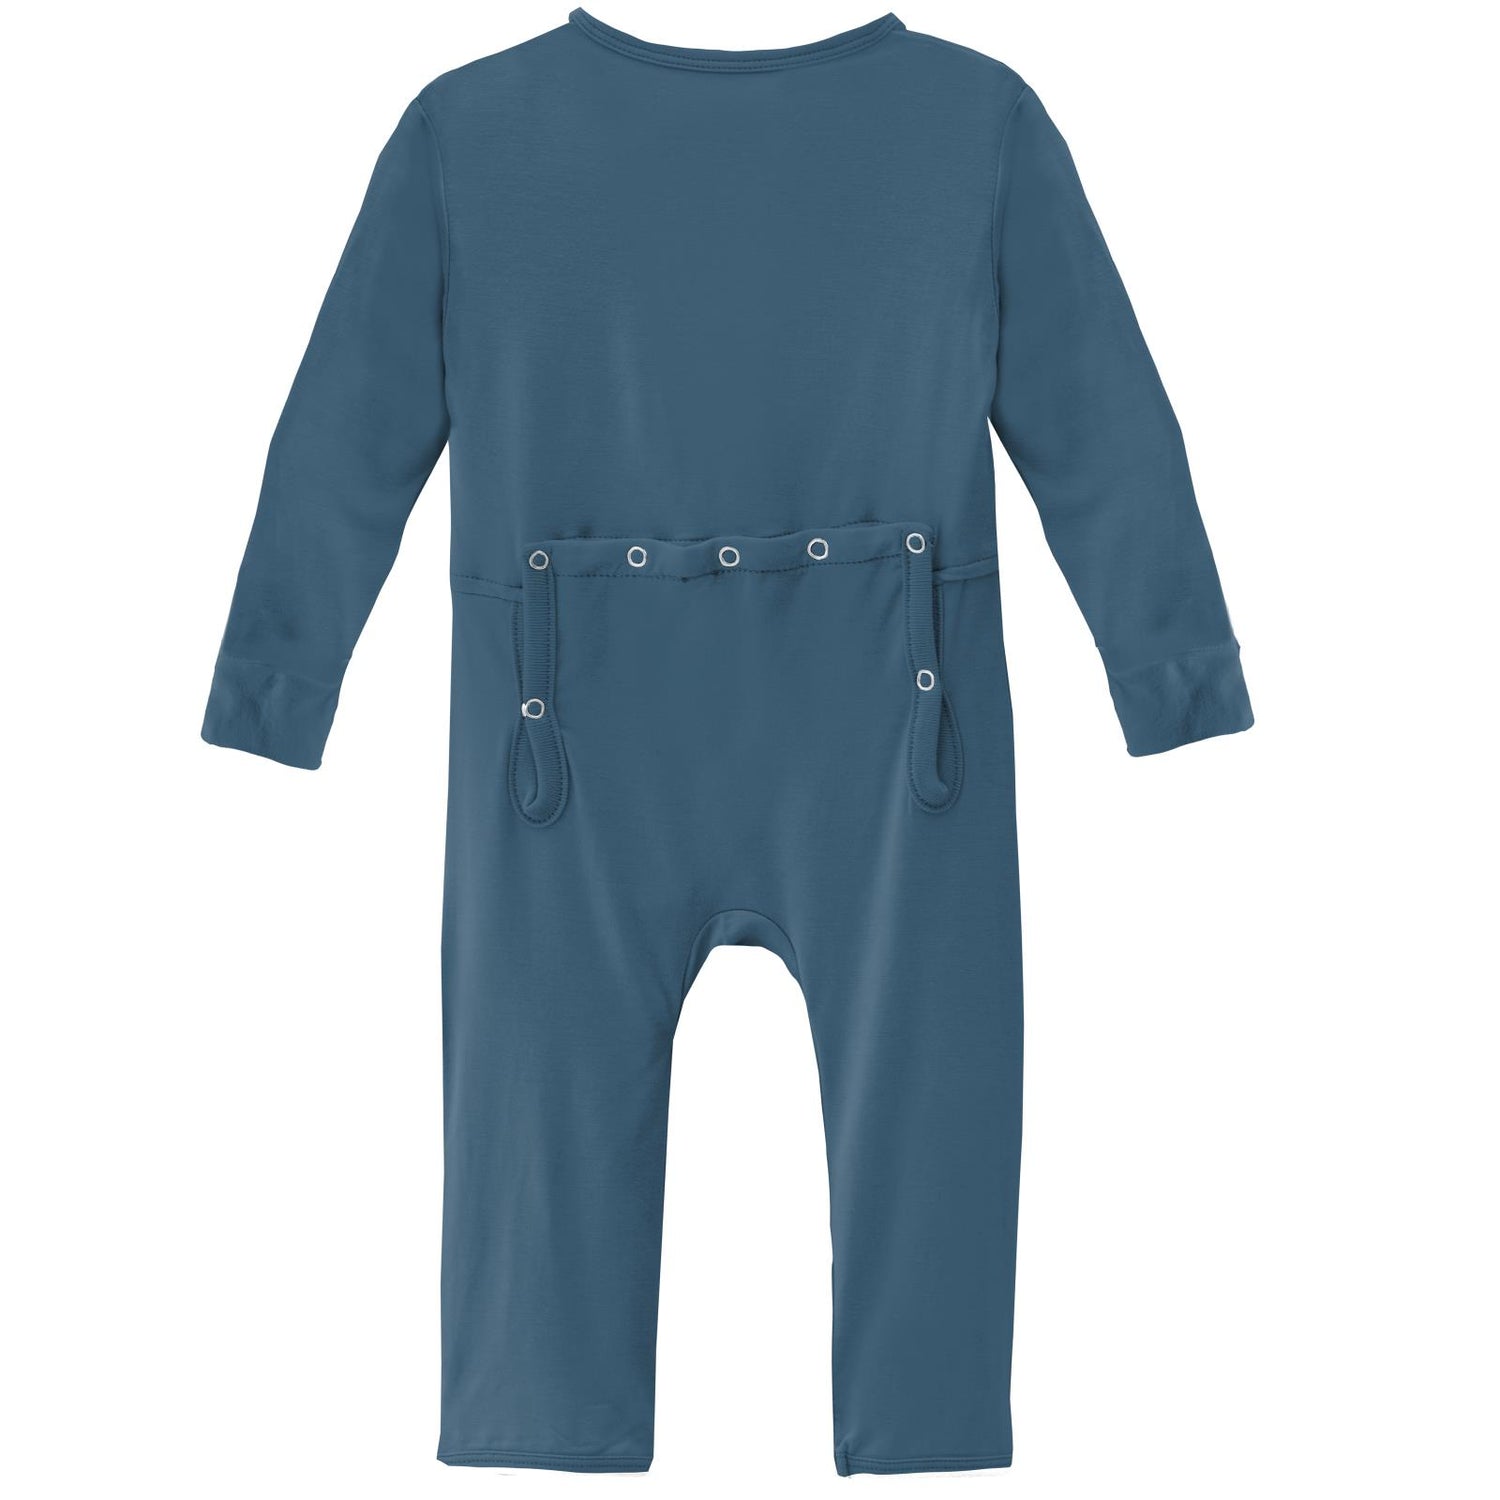 Coverall with Zipper in Deep Sea